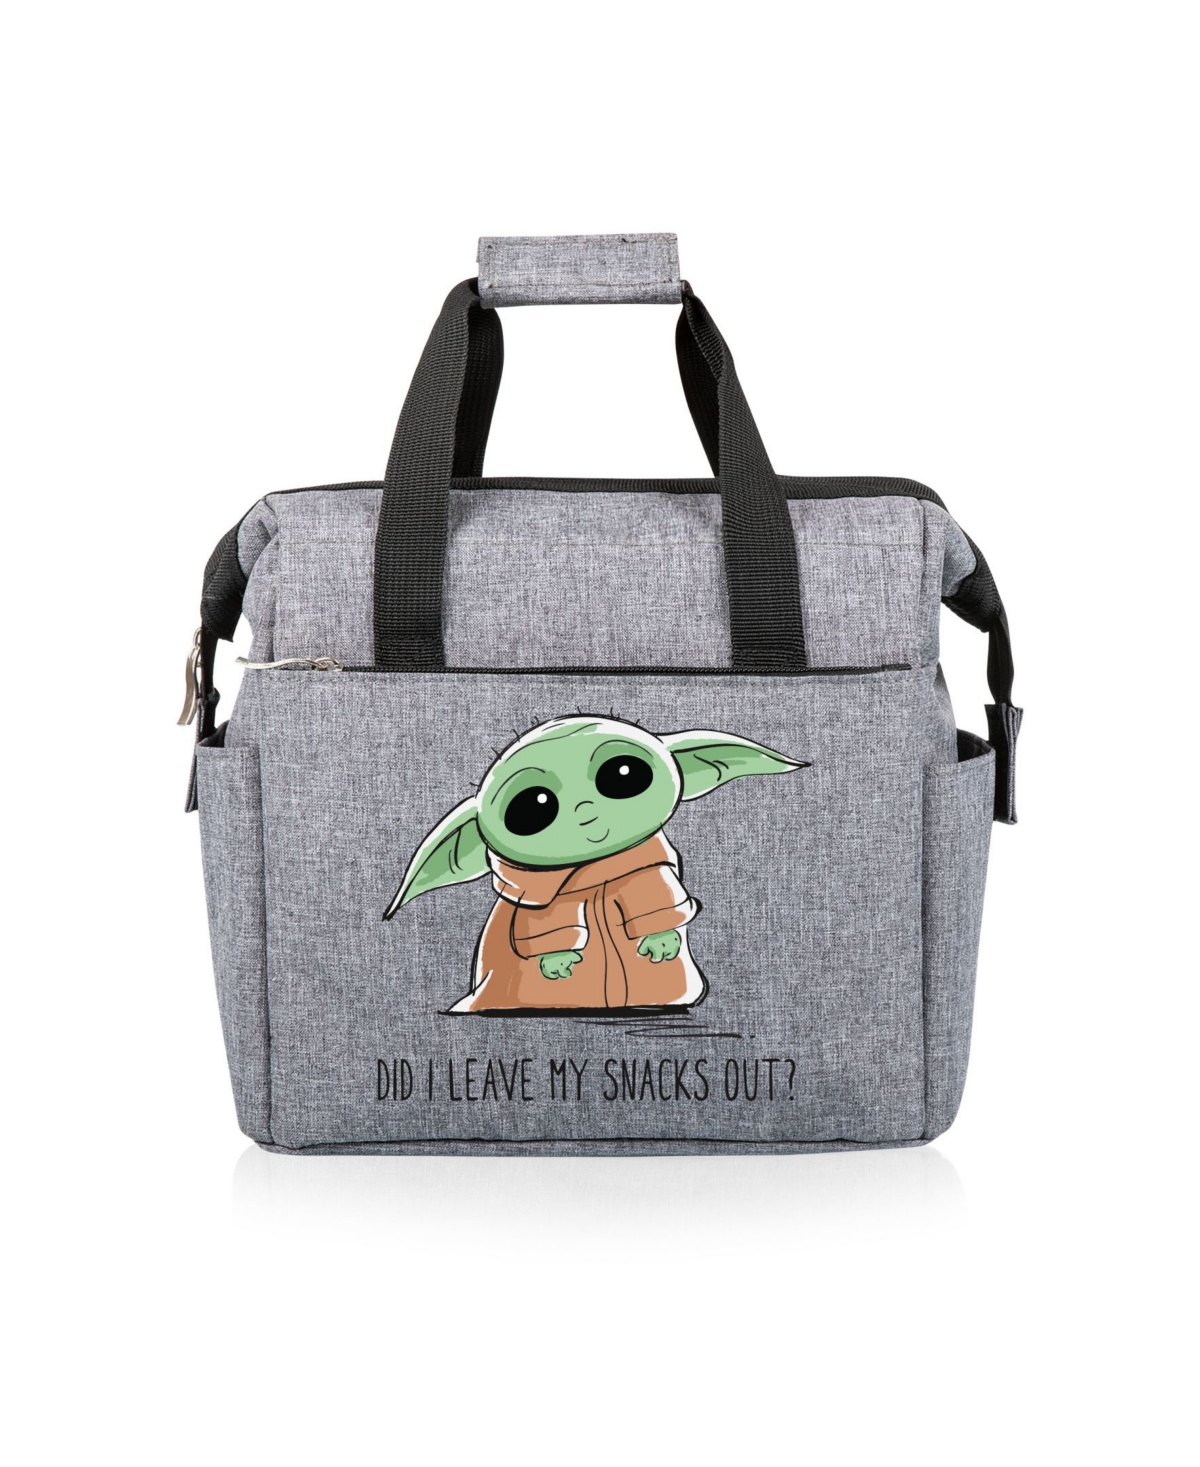 Mandalorian the Child on the Go Snacks Out Gray Lunch Cooler Bag - Heathered Gray